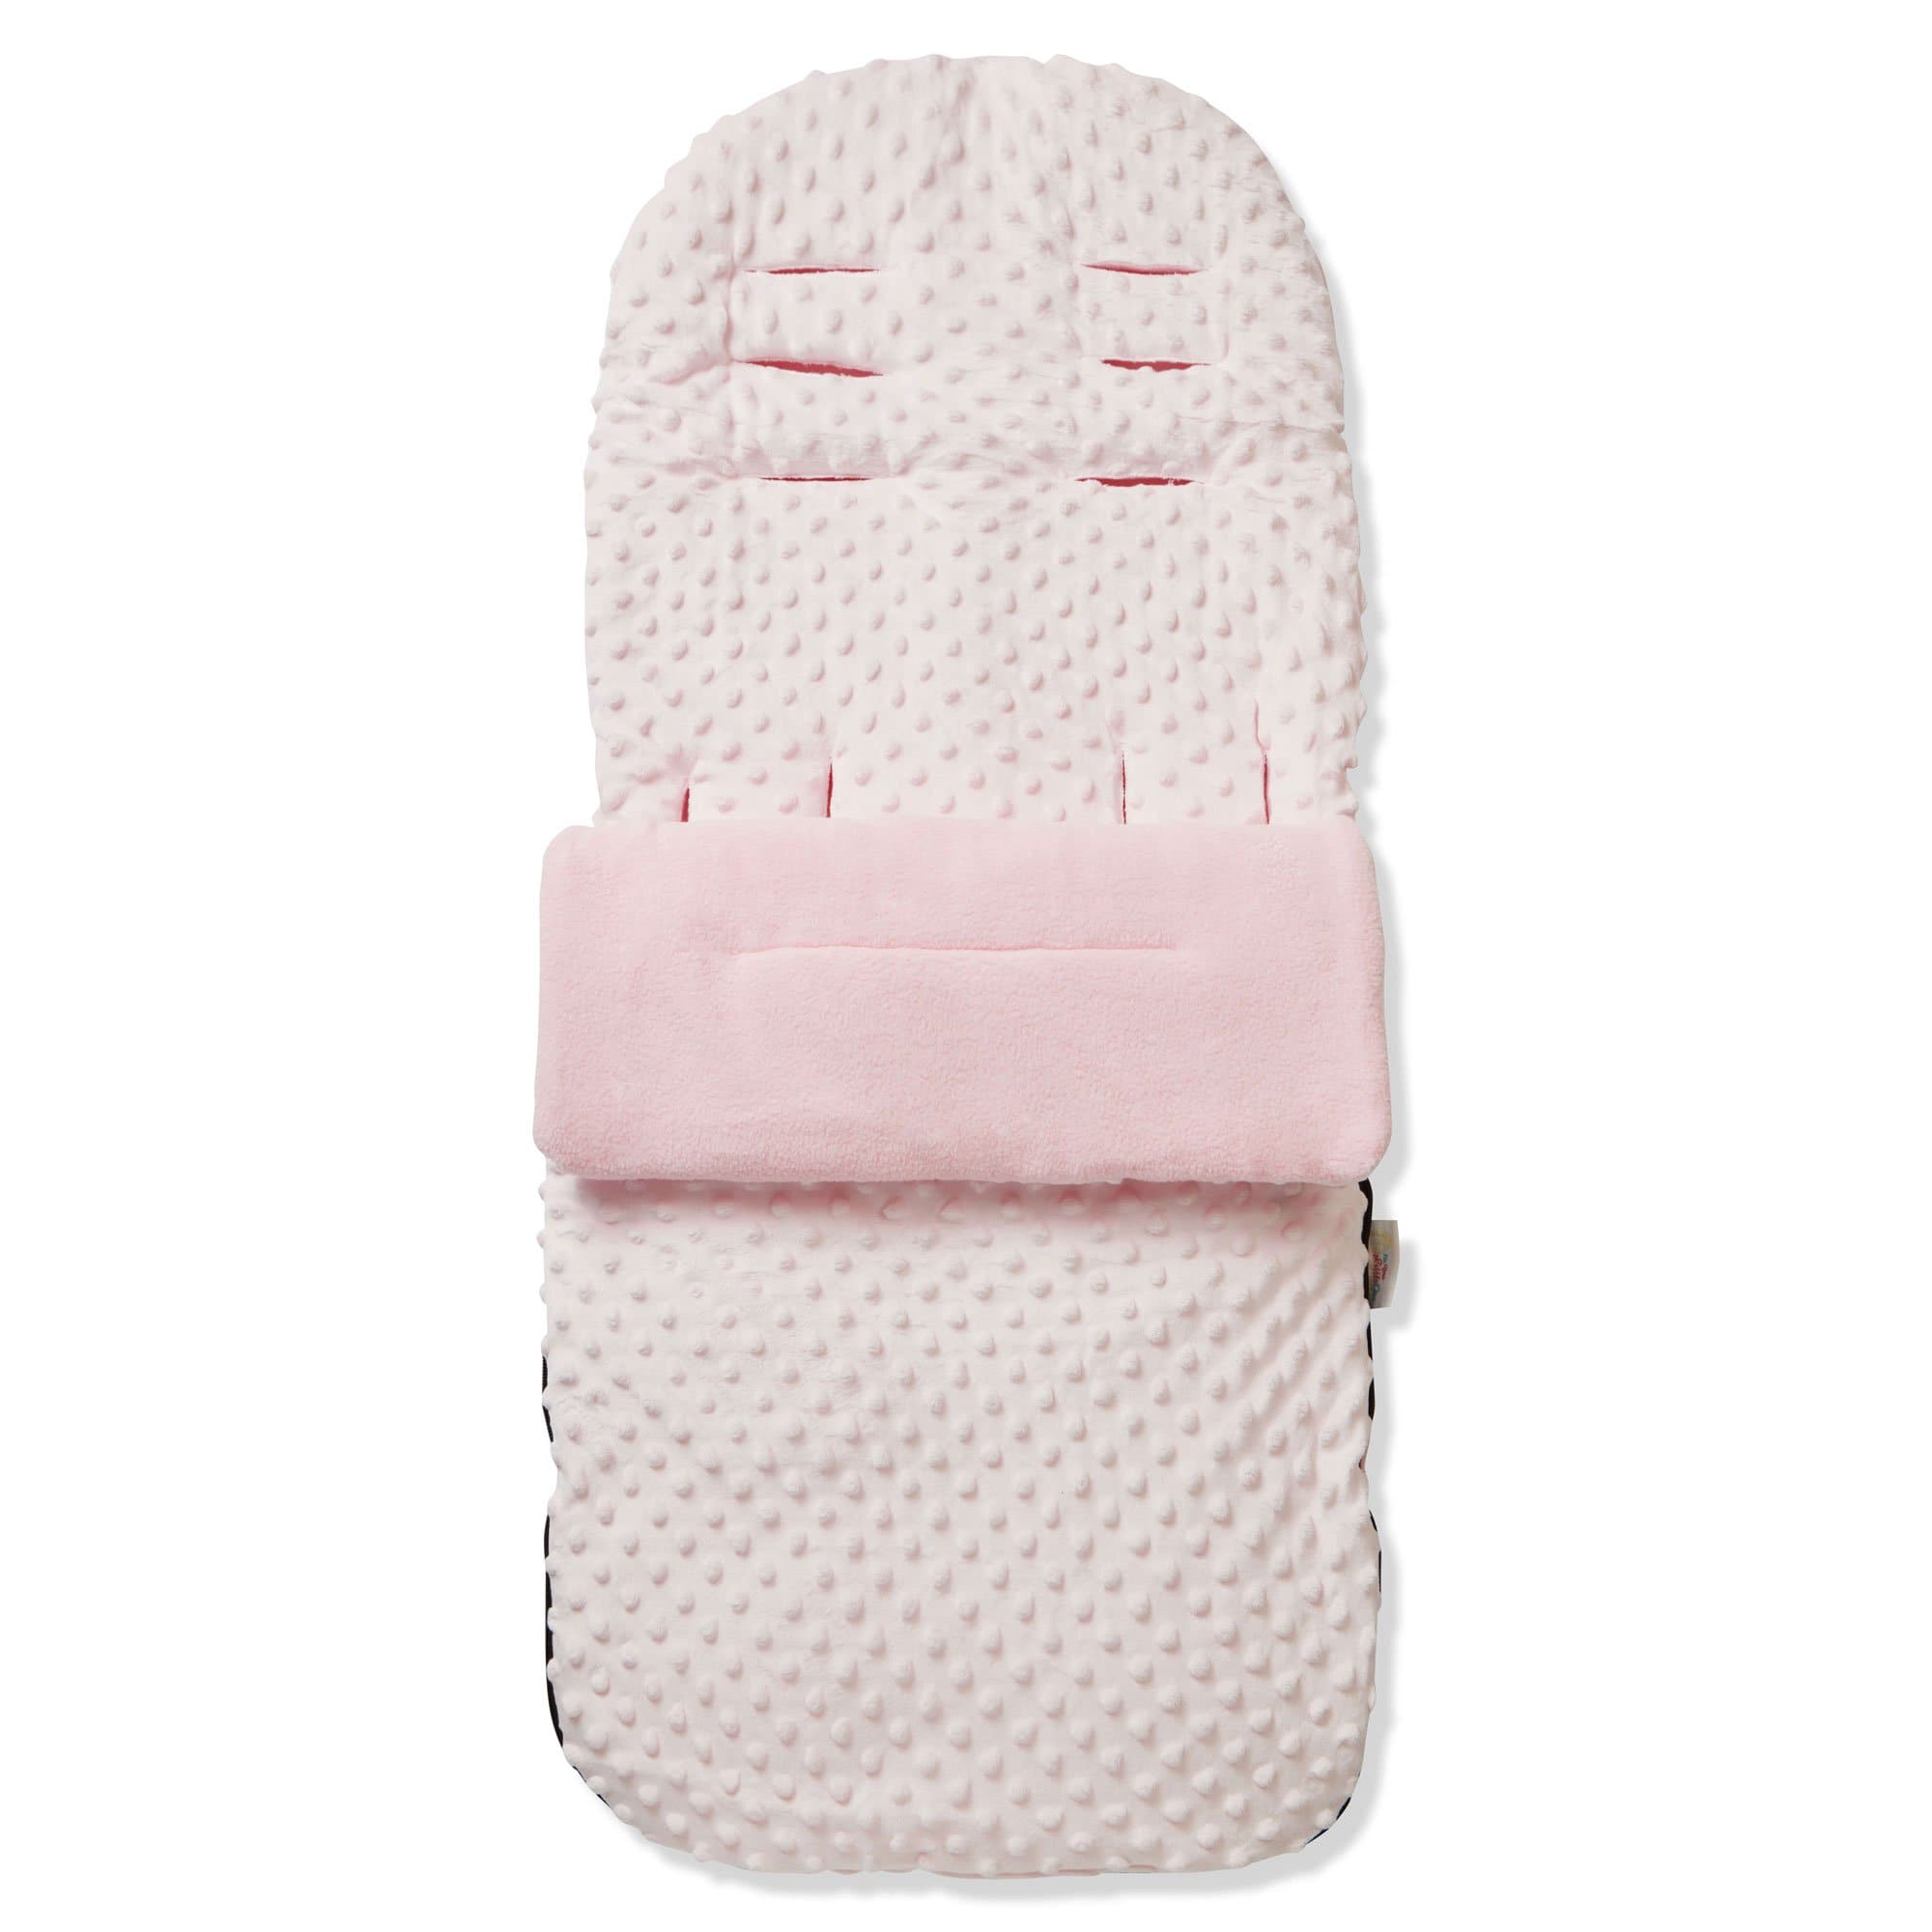 Dimple Footmuff / Cosy Toes Compatible with Egg - For Your Little One